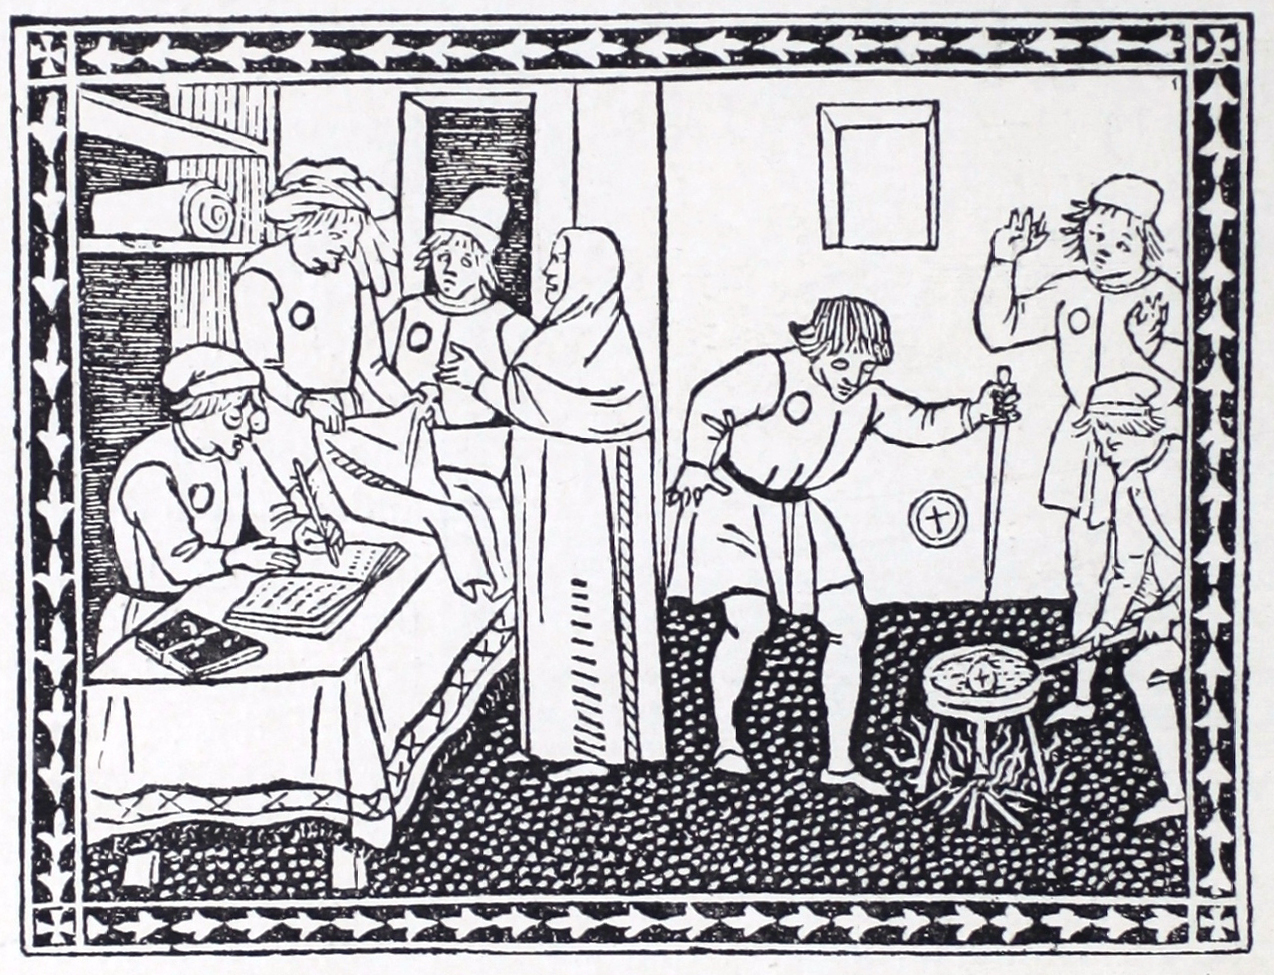 Wood engraved images shows an indoor scene with seven people in an enclosed space. Three men on the left are behind a table, one is writing in a book and the other two are standing and holding a piece of fabric. A woman stands on the other side of the table in left profile with one left arm raised. On the right side of the image, three men use swoards to prod a firepit. 